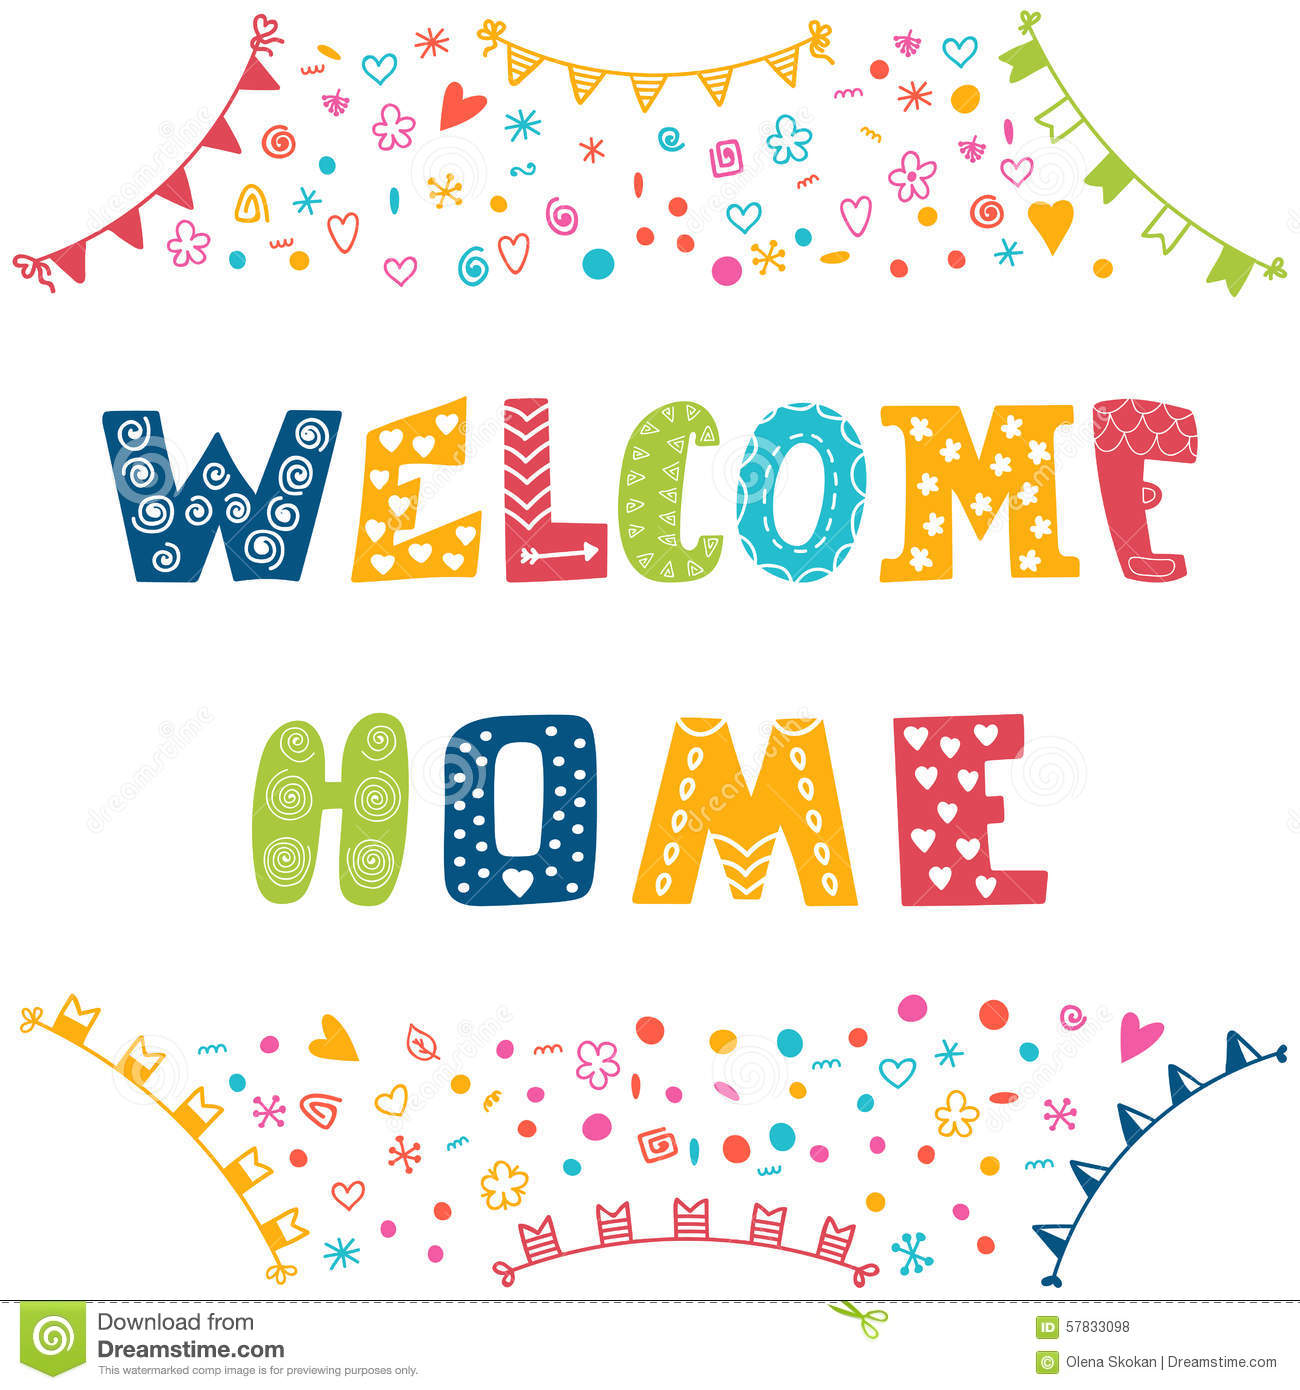 Welcome home text with colorful design elements Royalty Free Stock Photos